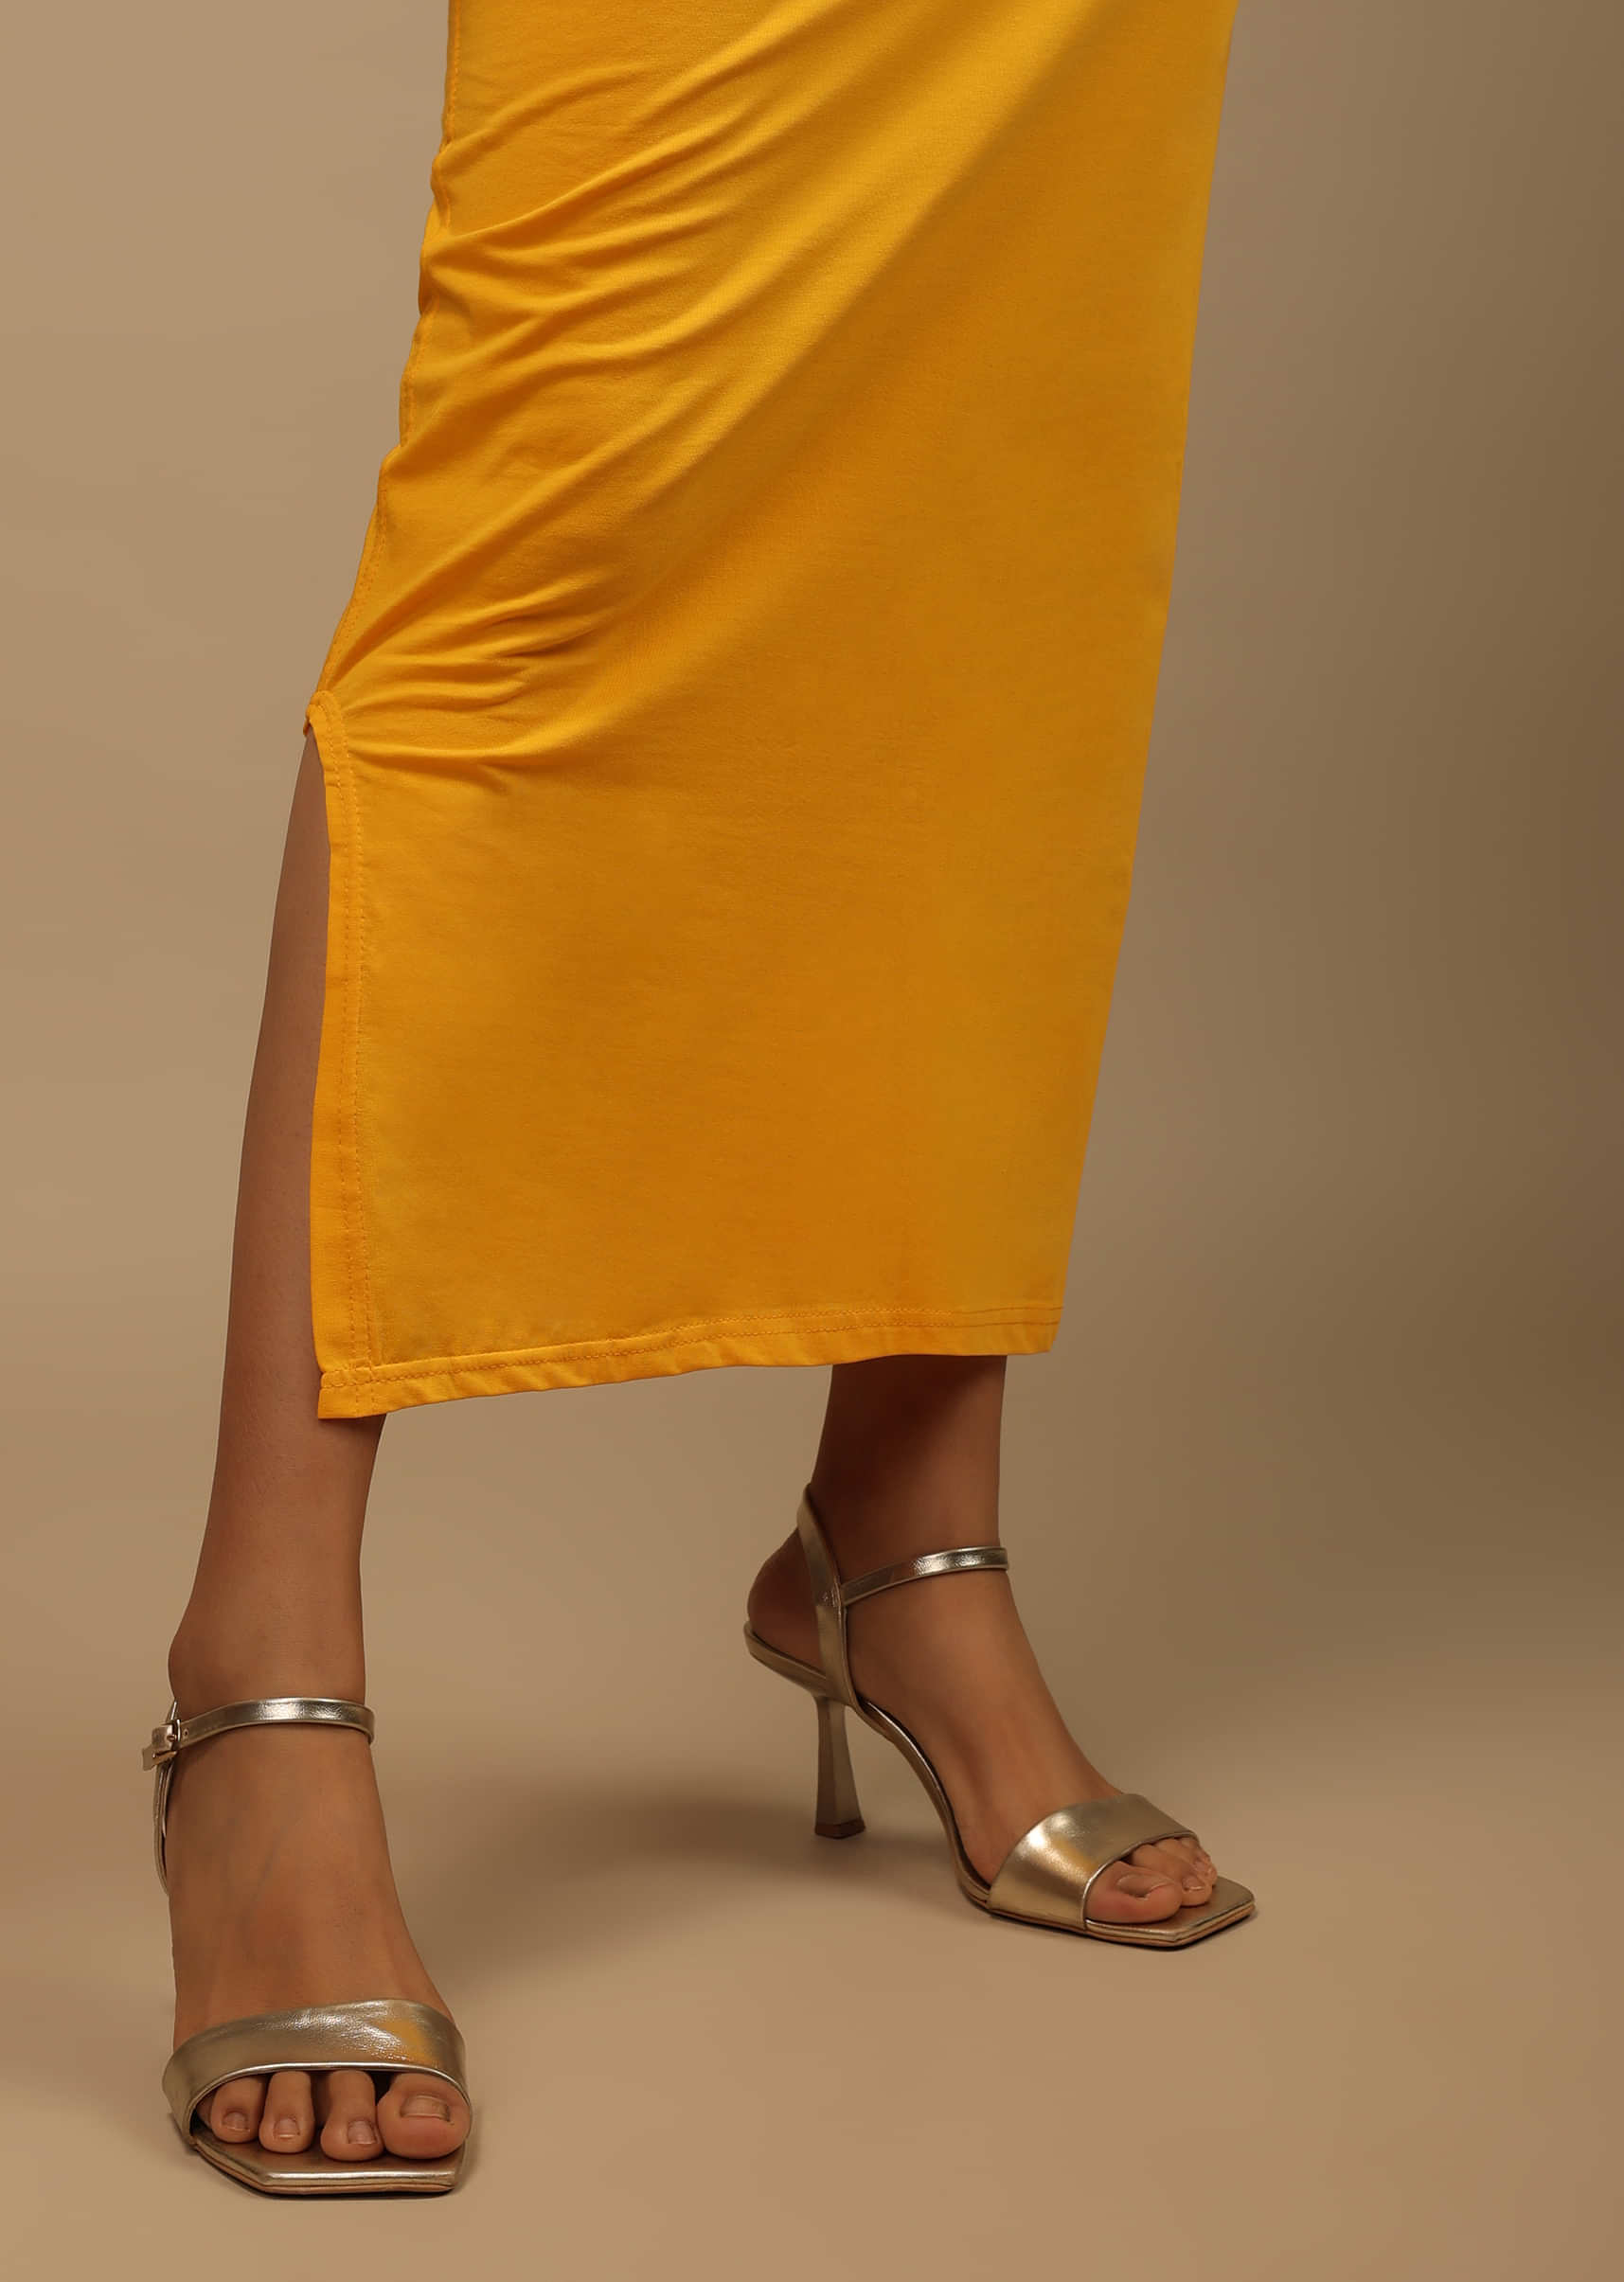 Chrome Yellow Shapewear Saree Petticoat In Cotton Lycra With Elastic Waistband And Slit